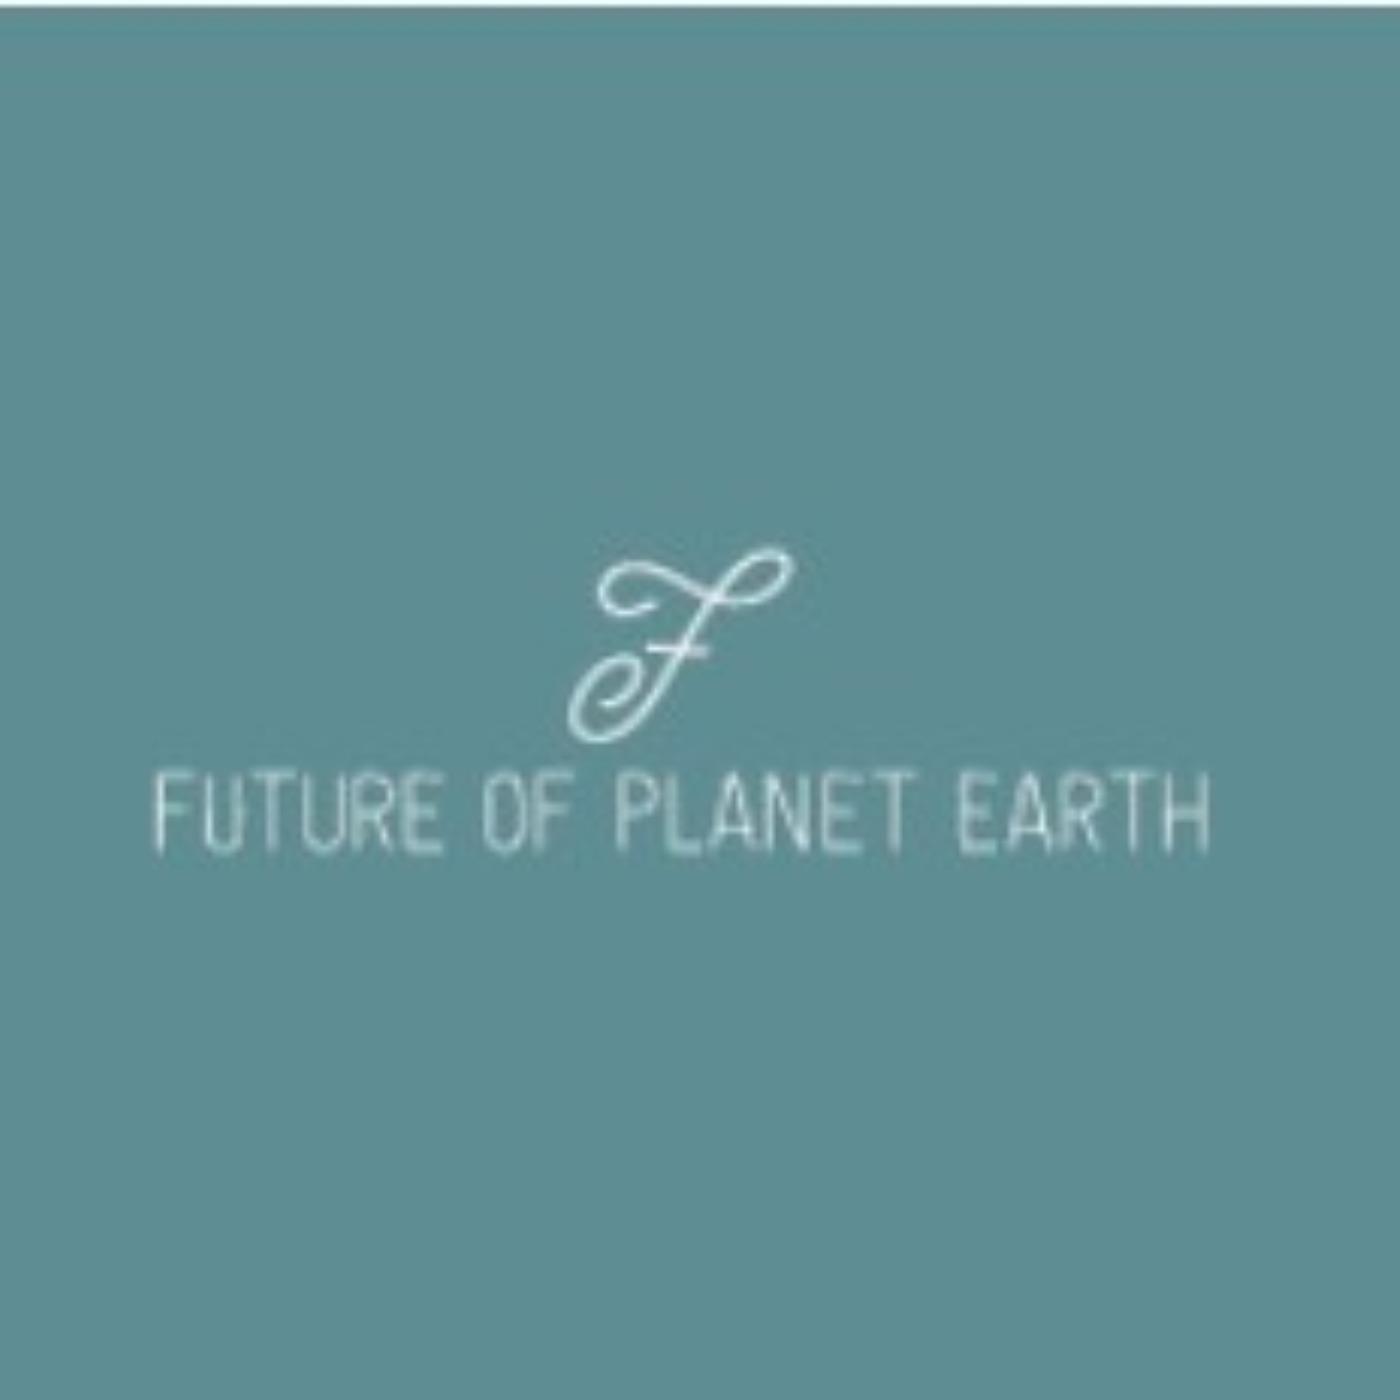 Future of Planet Earth